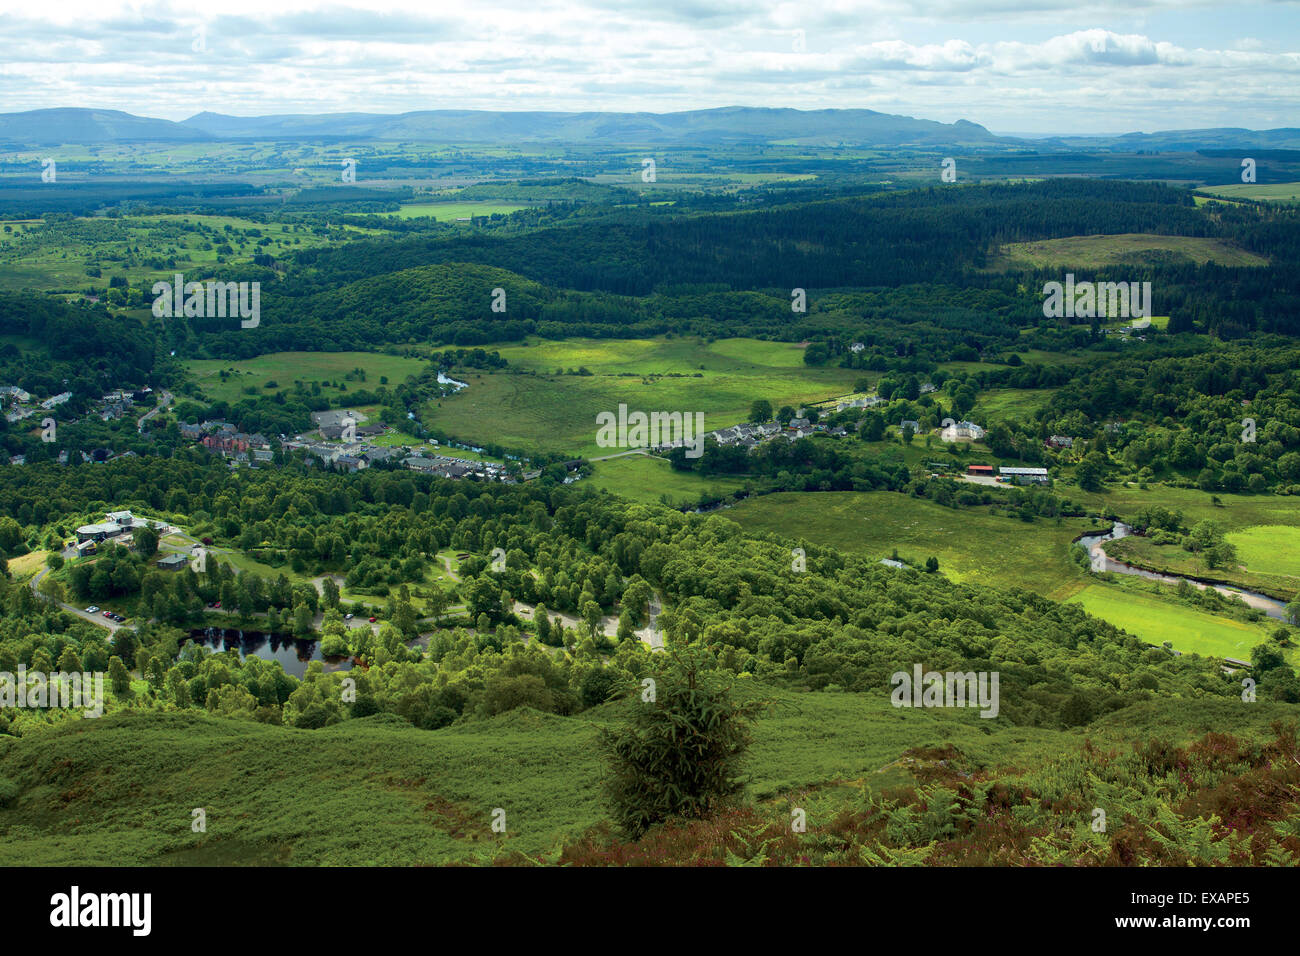 Aberfoyle, David Marshall Lodge and The Campsie Fells from Craigmore, Loch Lomond and The Trossachs National Park, Stirlingshire Stock Photo